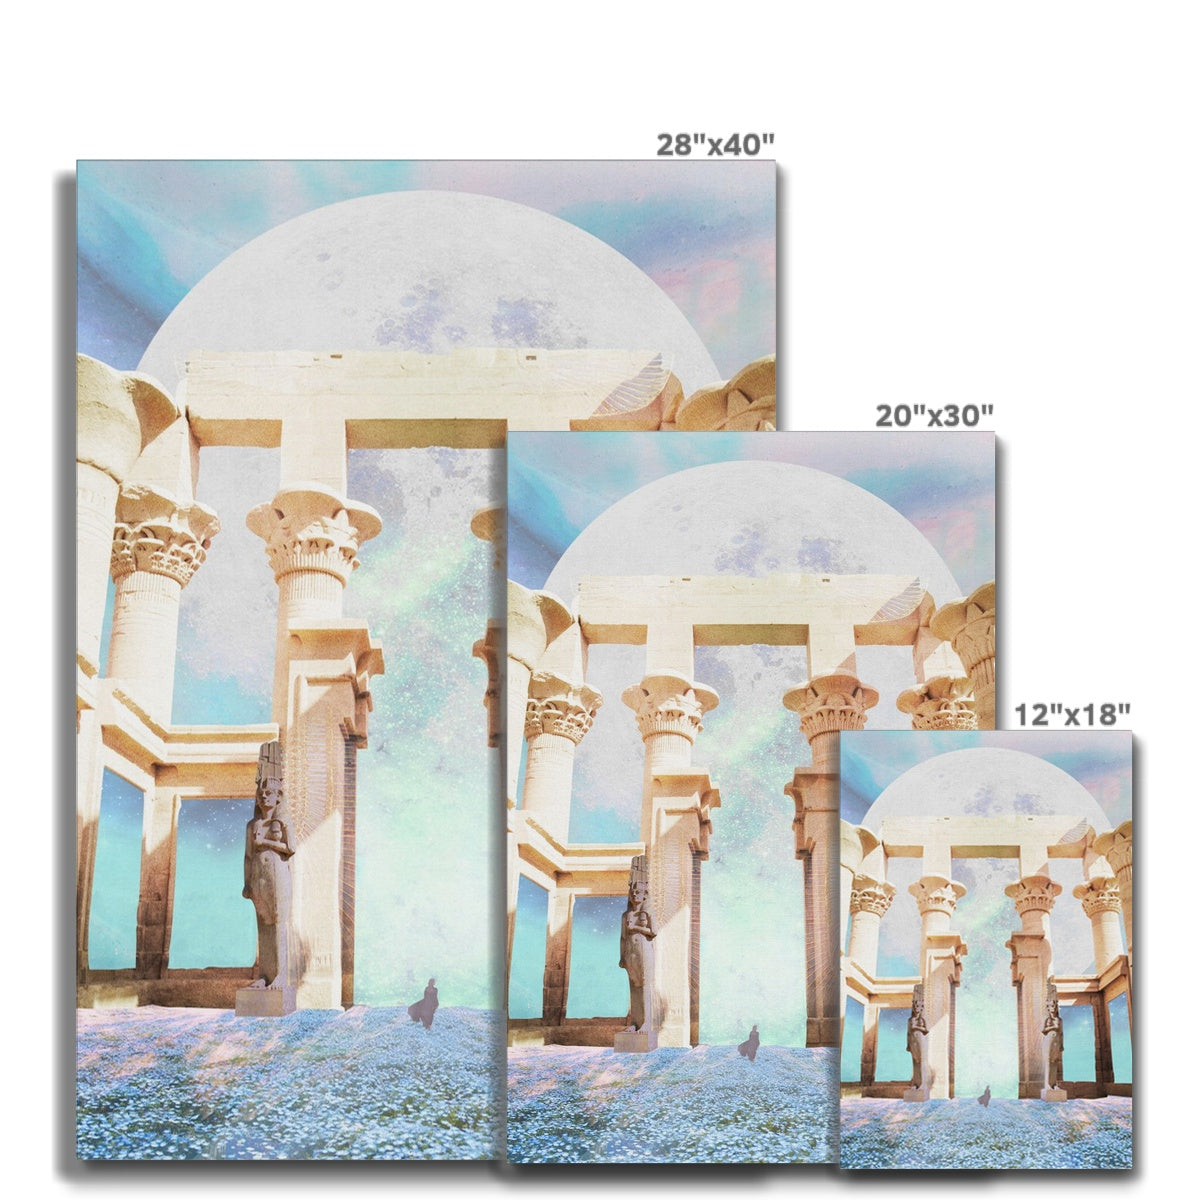 Temple of Isis Canvas - Starseed Designs Inc.